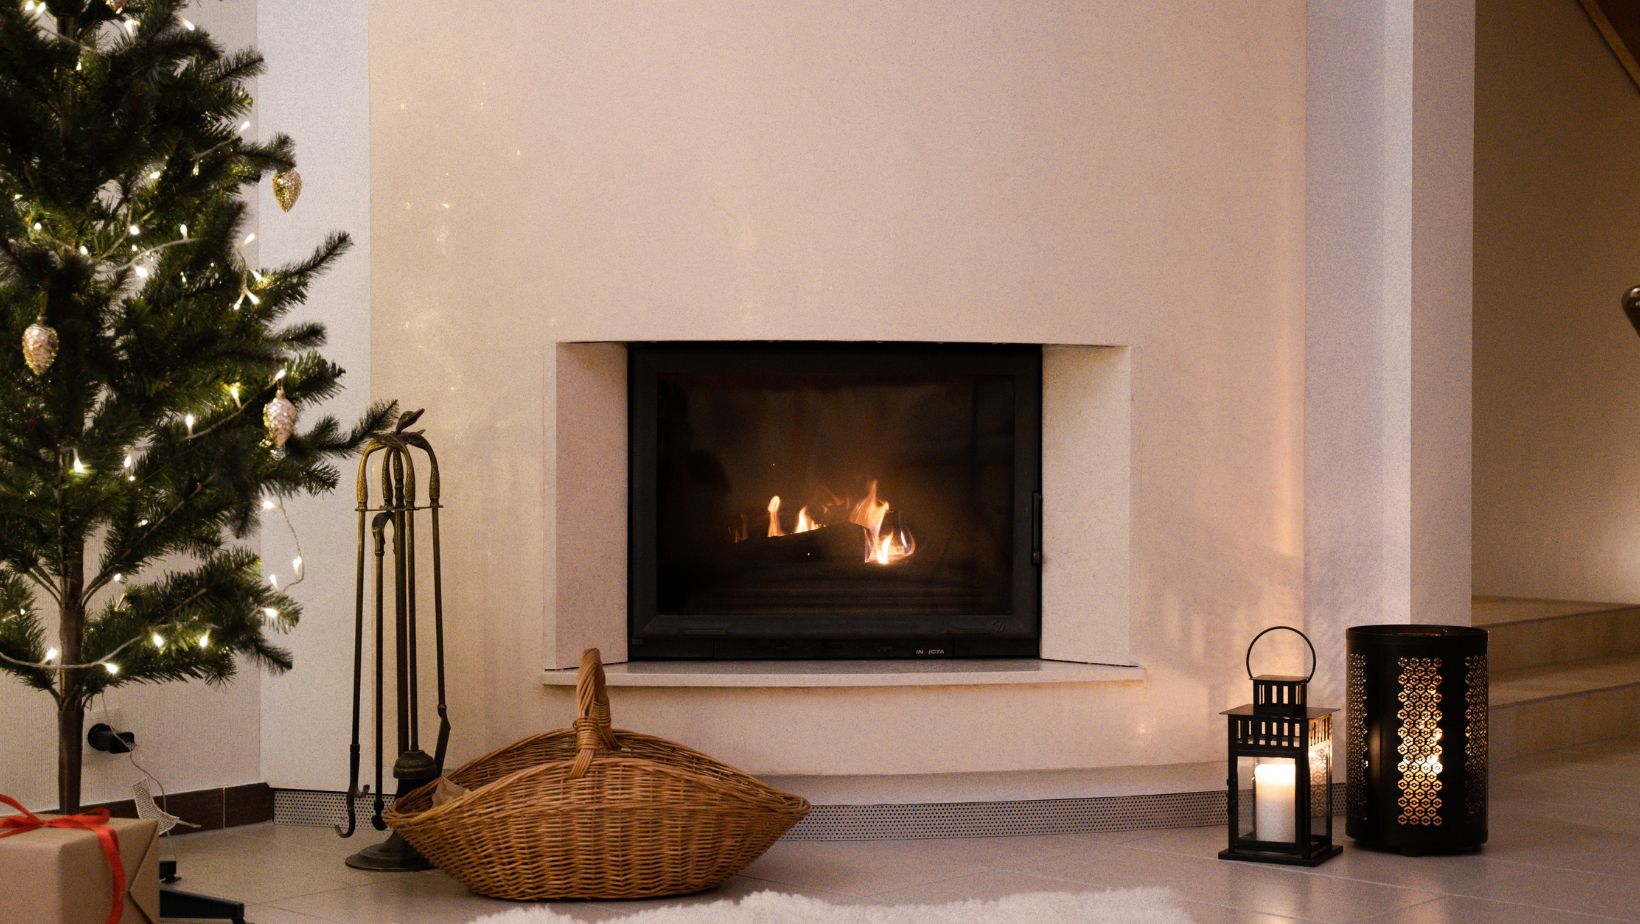 All You Need to Know About Buying a Décor Flame Electric Fireplace Heater